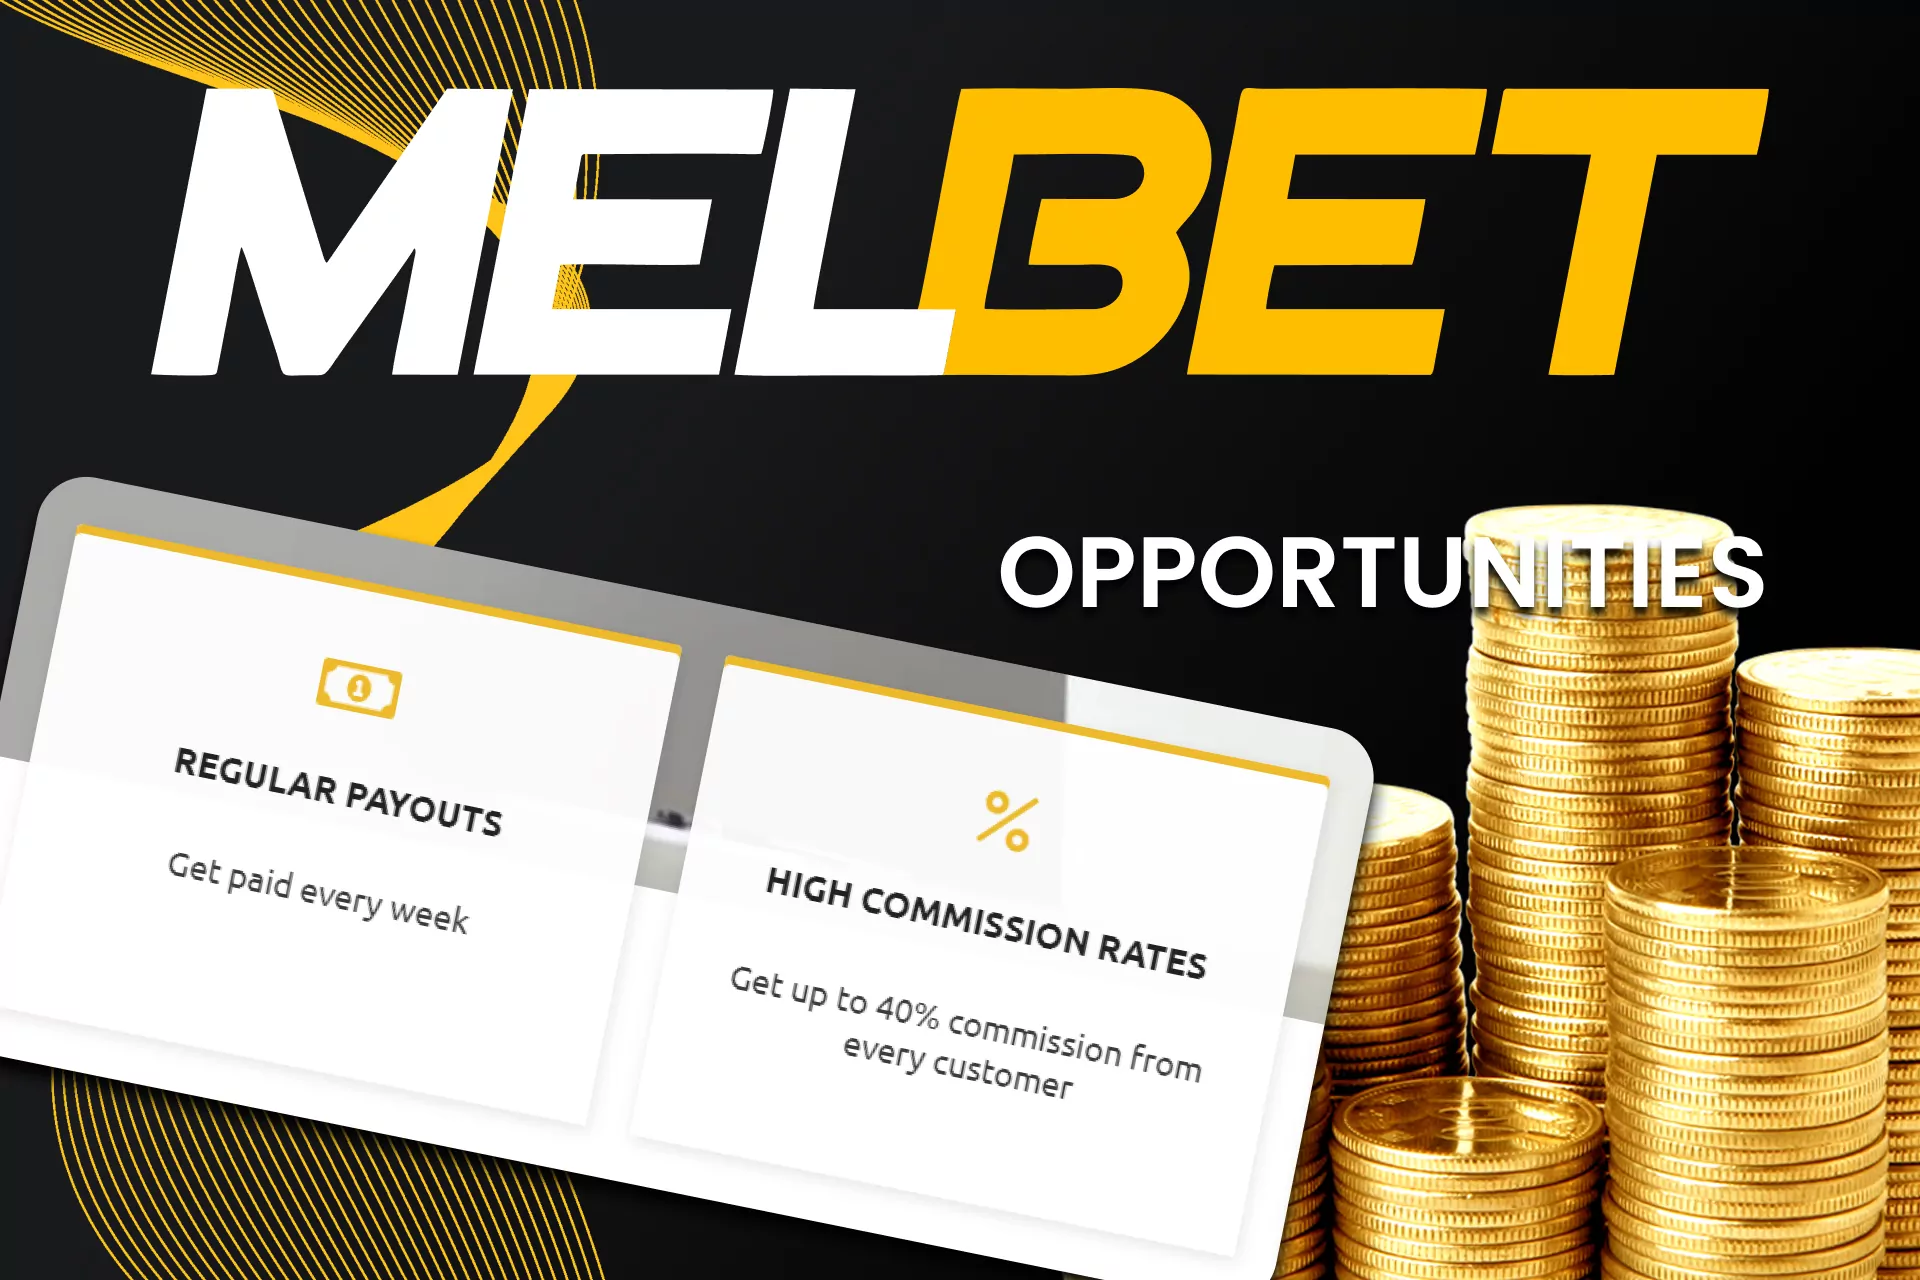 Learn about the possibilities of the Melbet affiliate program.